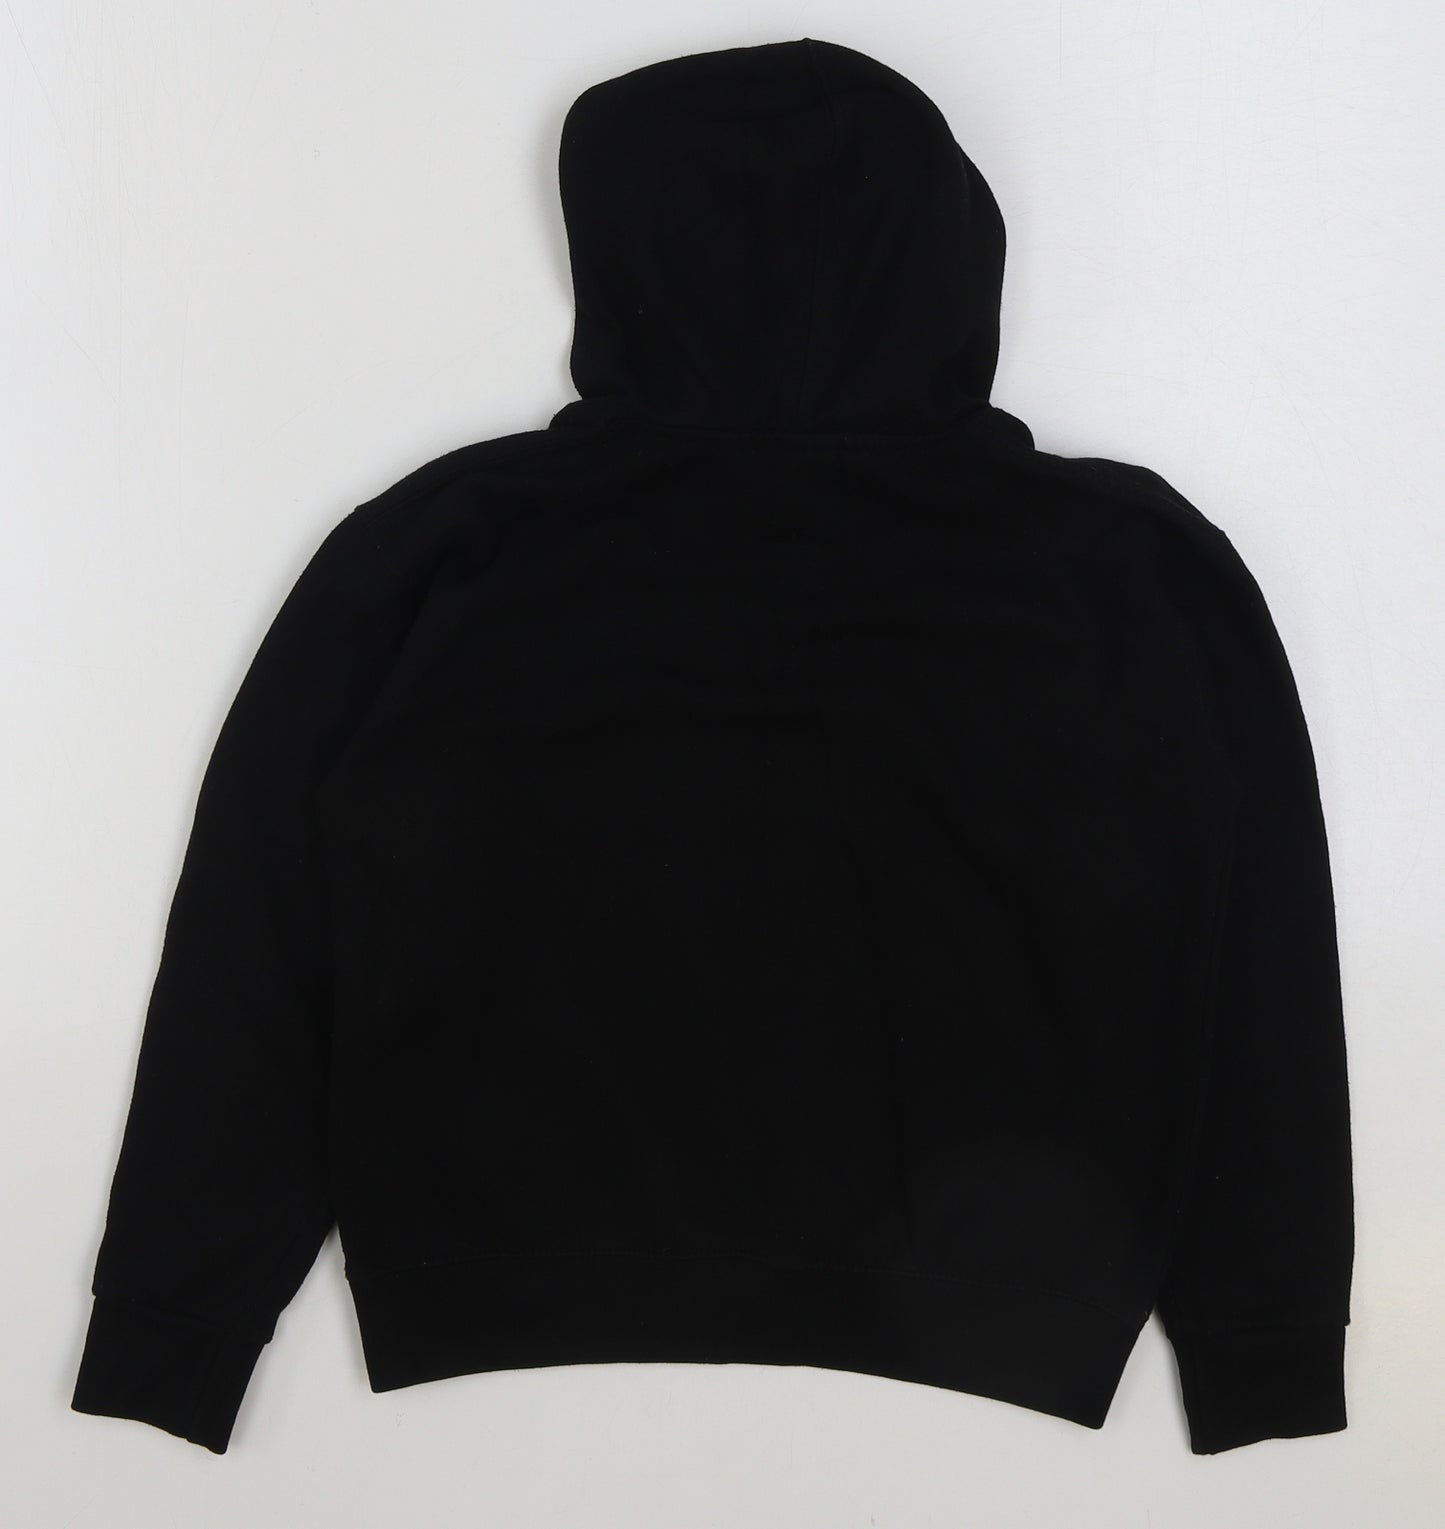 Preworn Boys Black Polyester Pullover Hoodie Size 7-8 Years Pullover